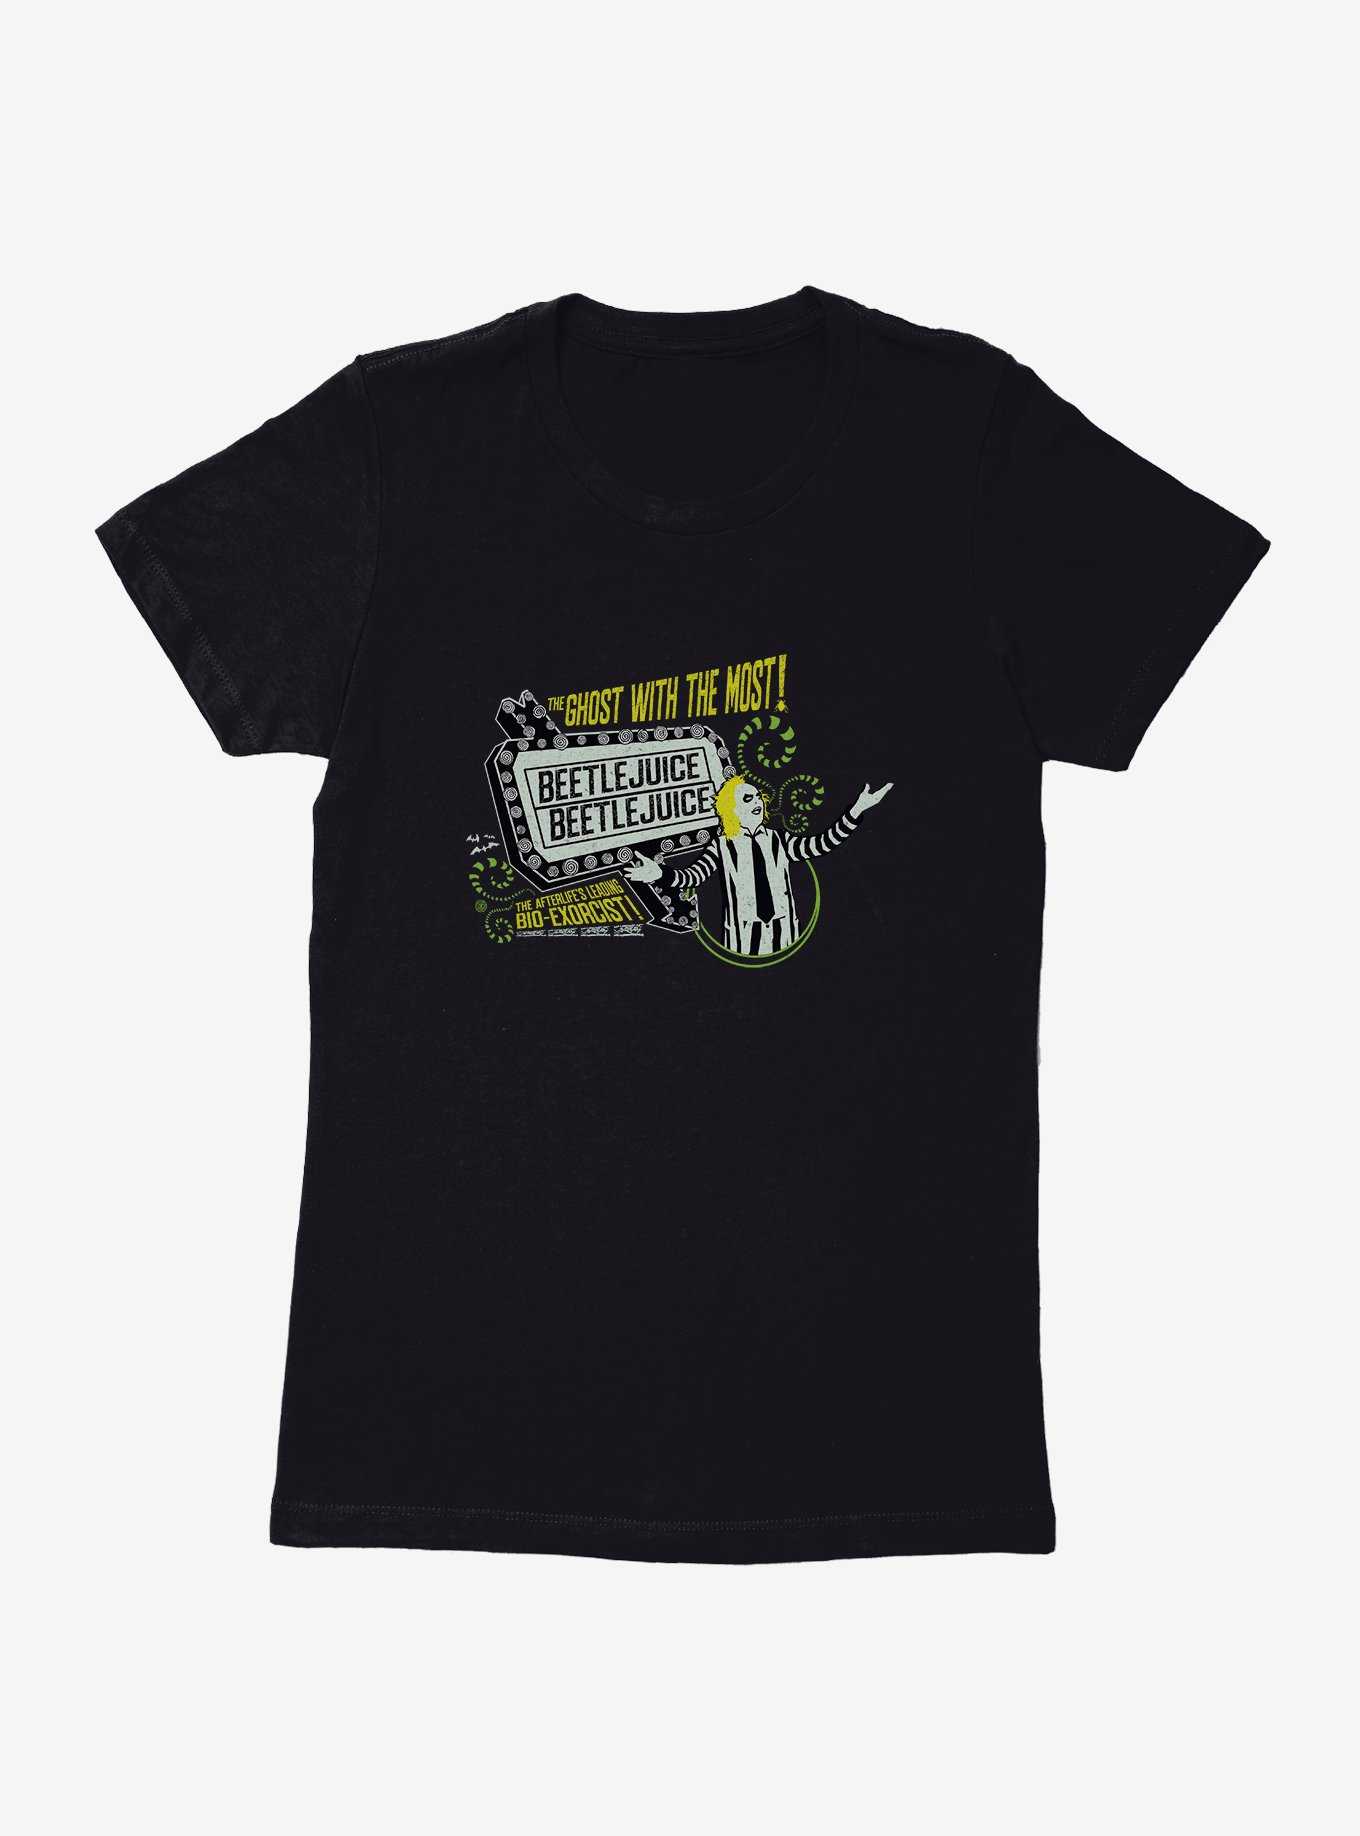 Beetlejuice Ghost With Most Womens T-Shirt, , hi-res